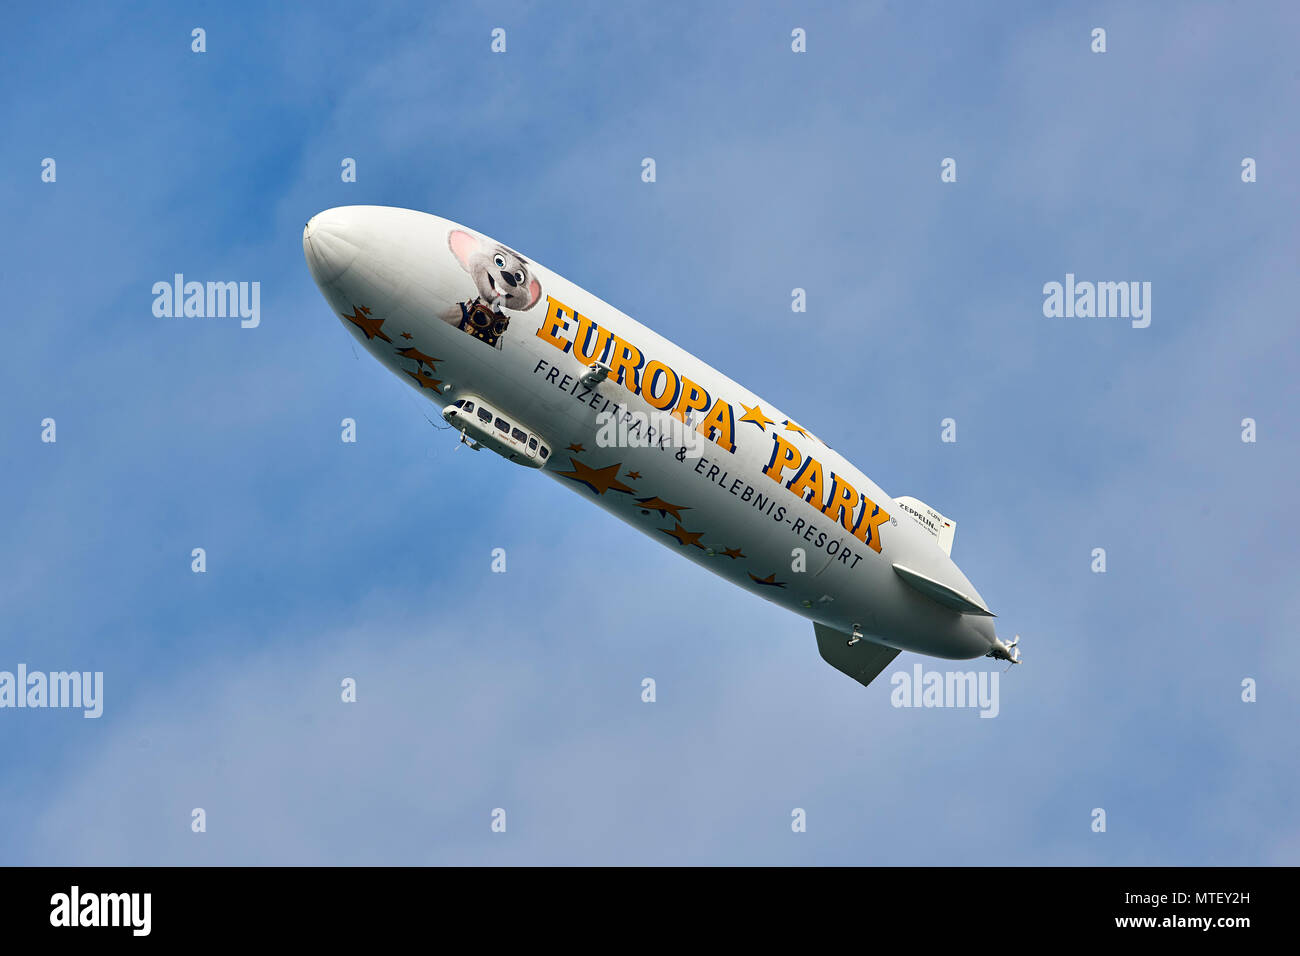 Zeppelin (dirigible) advertising Europa Park, largest theme park in Germany Stock Photo